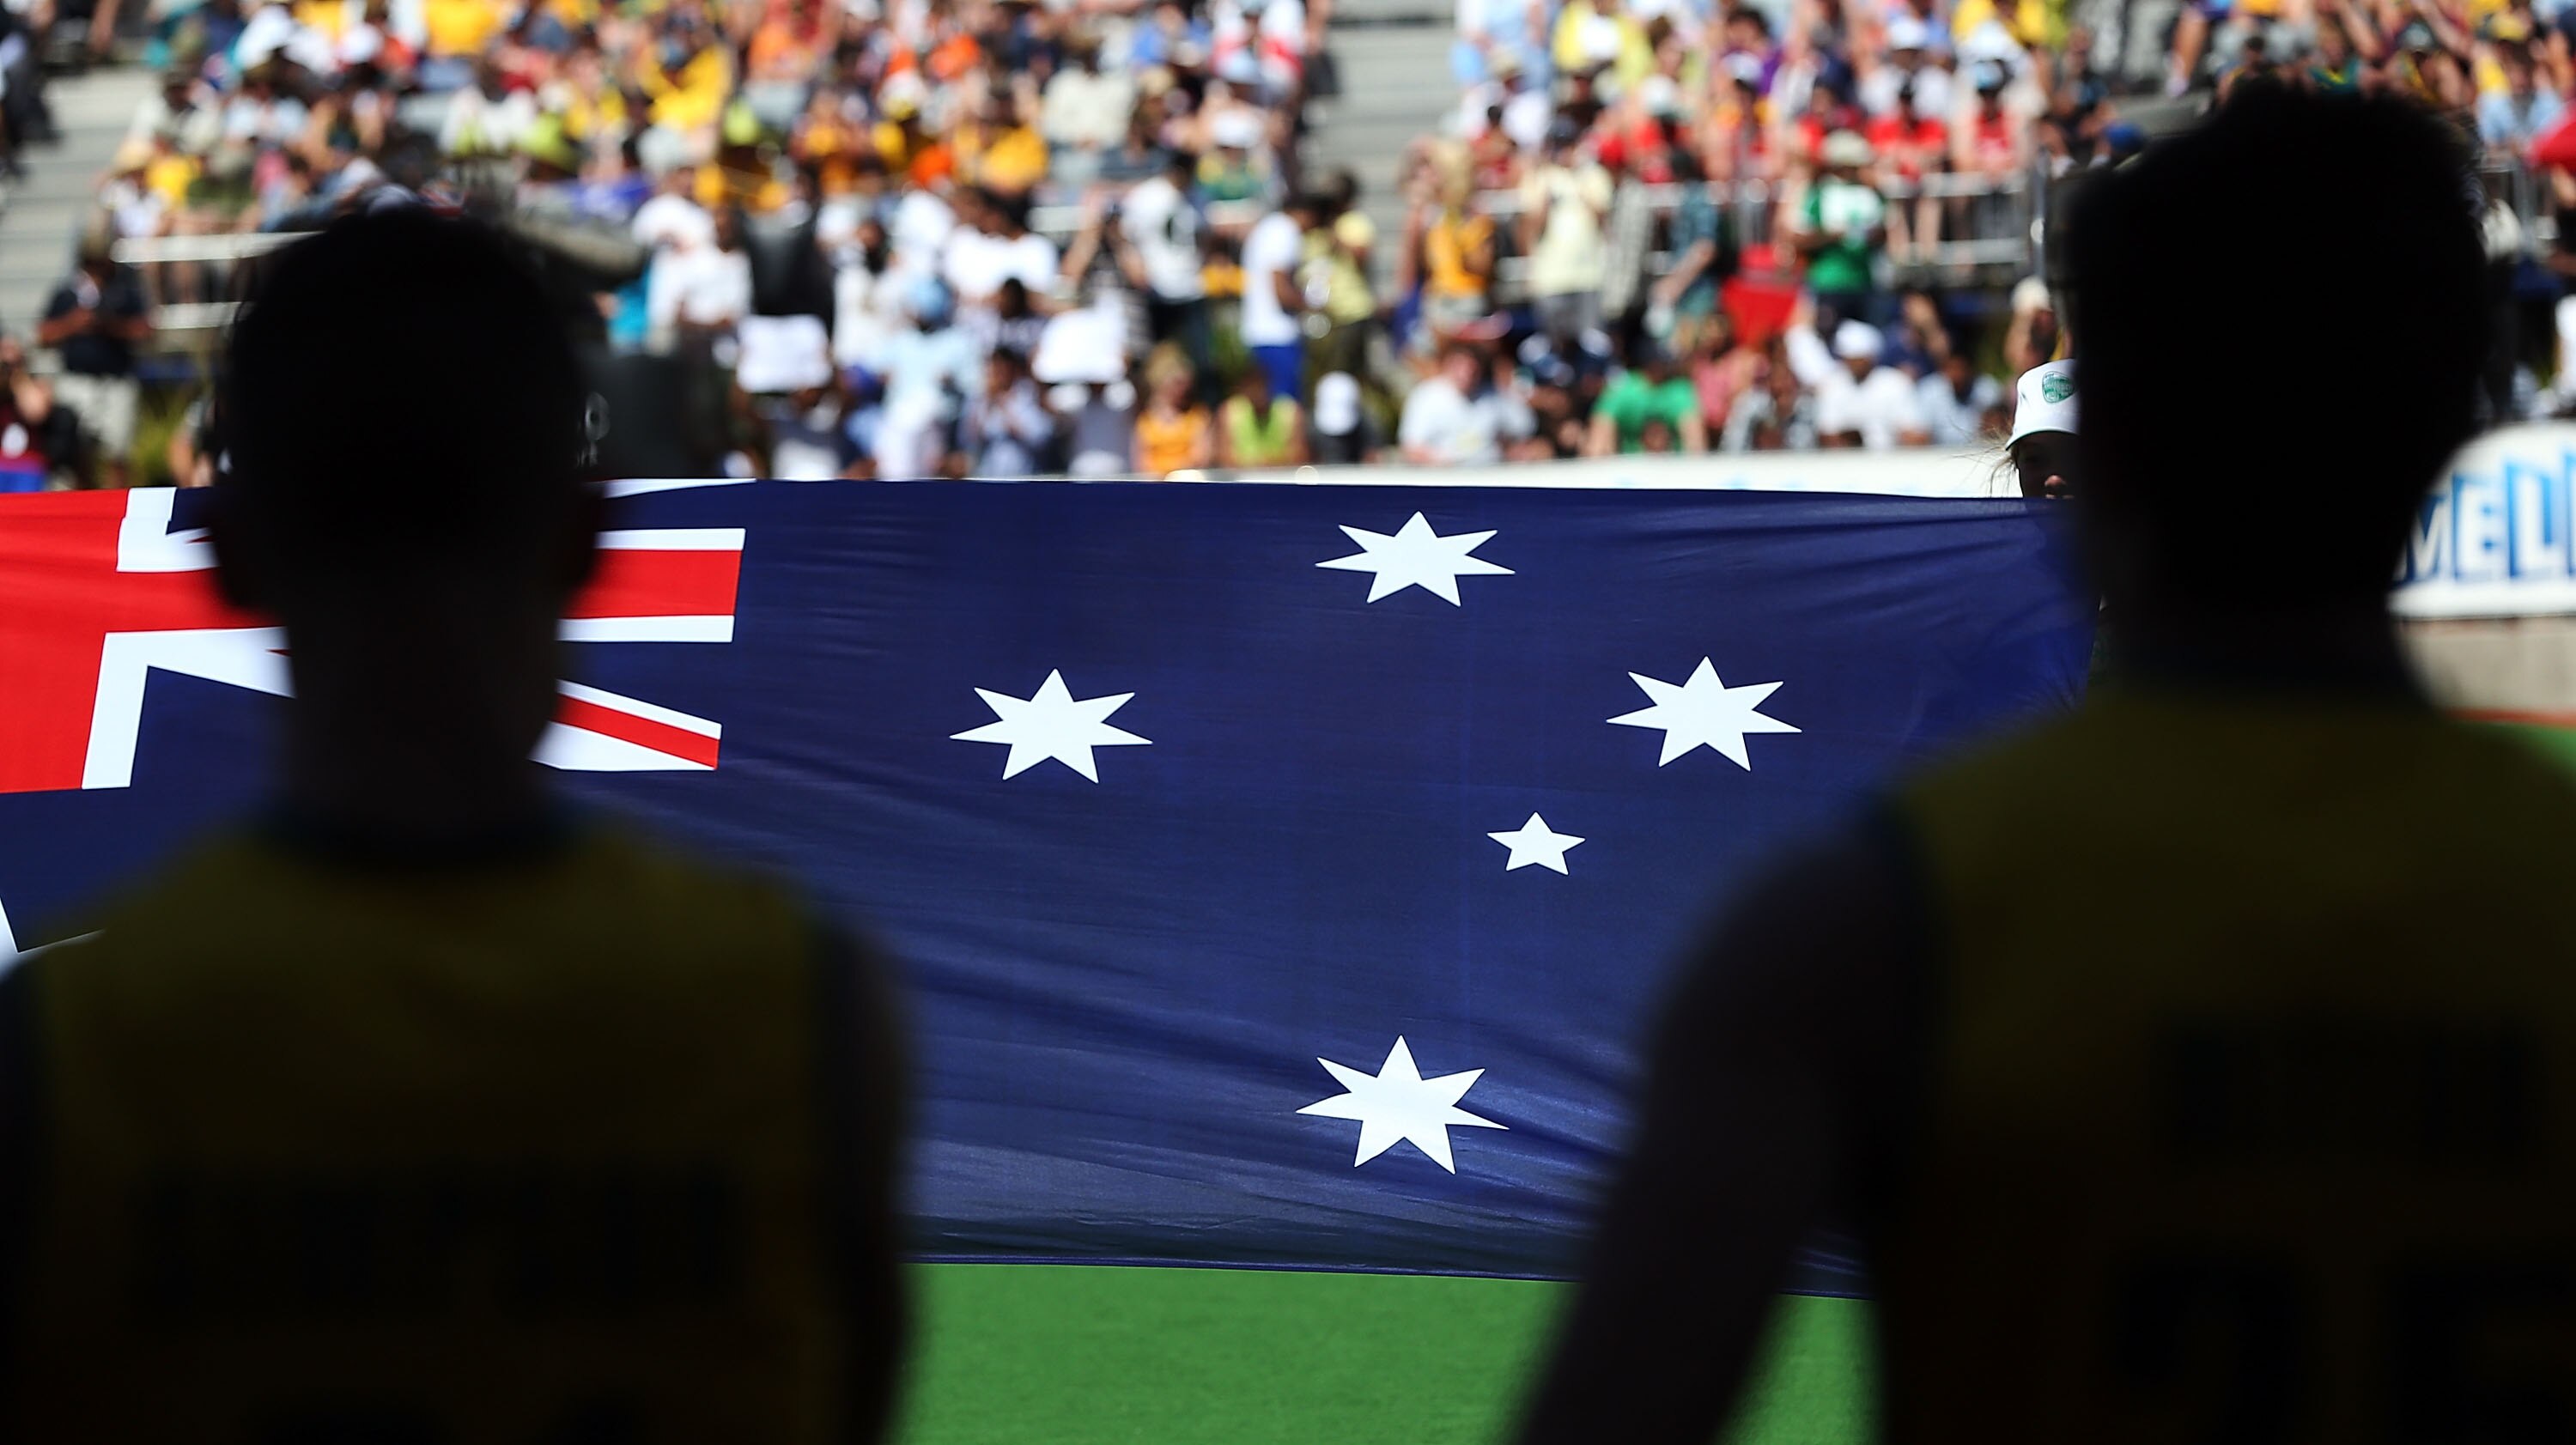 The national discussion about a change to the national anthem has been sparked